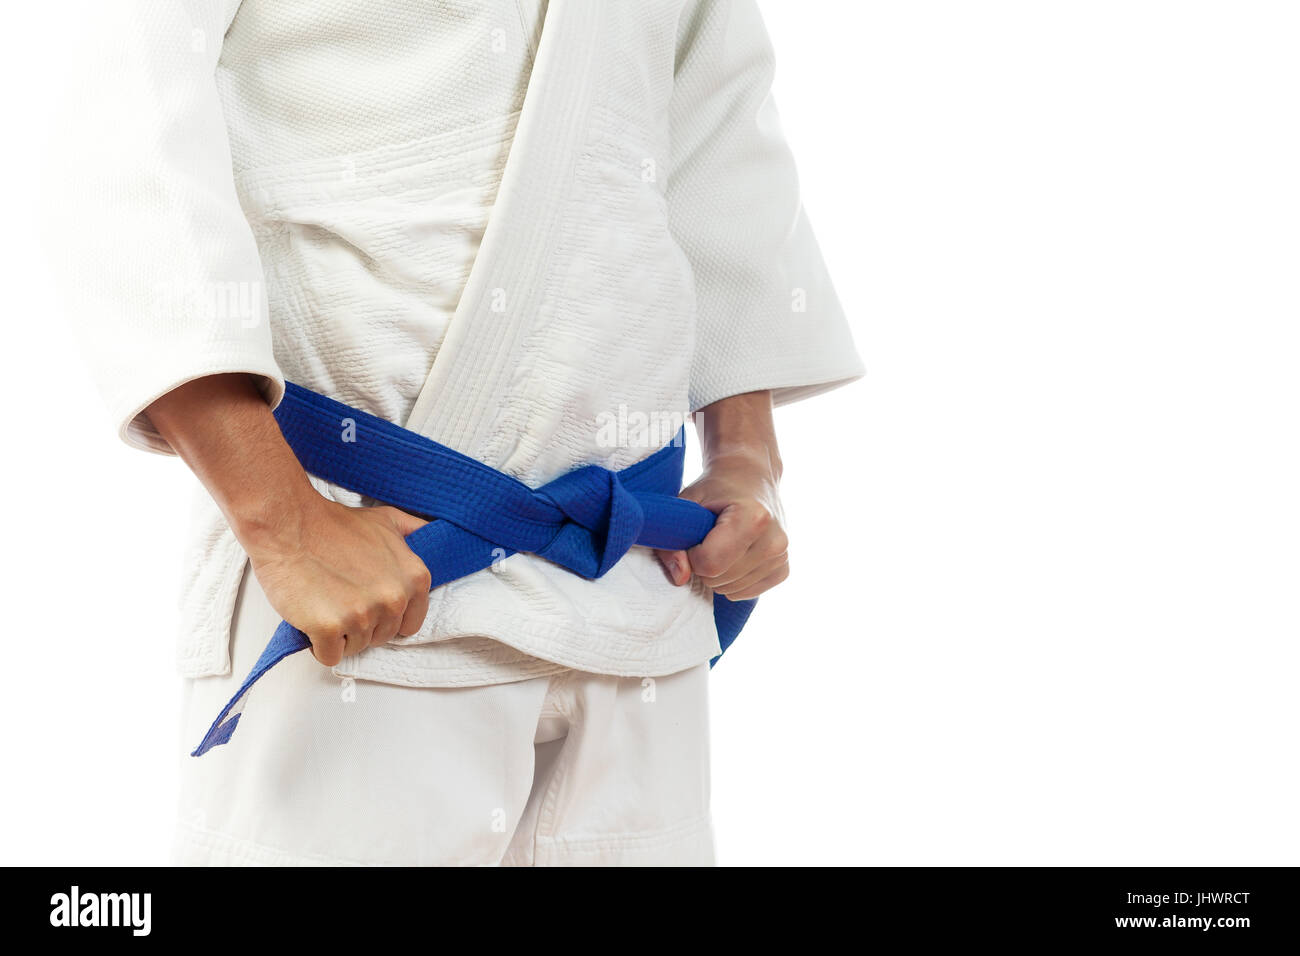 Close-up of a man fighter in a white kimono for judo, Jiu Jitsu ties up a  blue belt on an isolated white background Stock Photo - Alamy